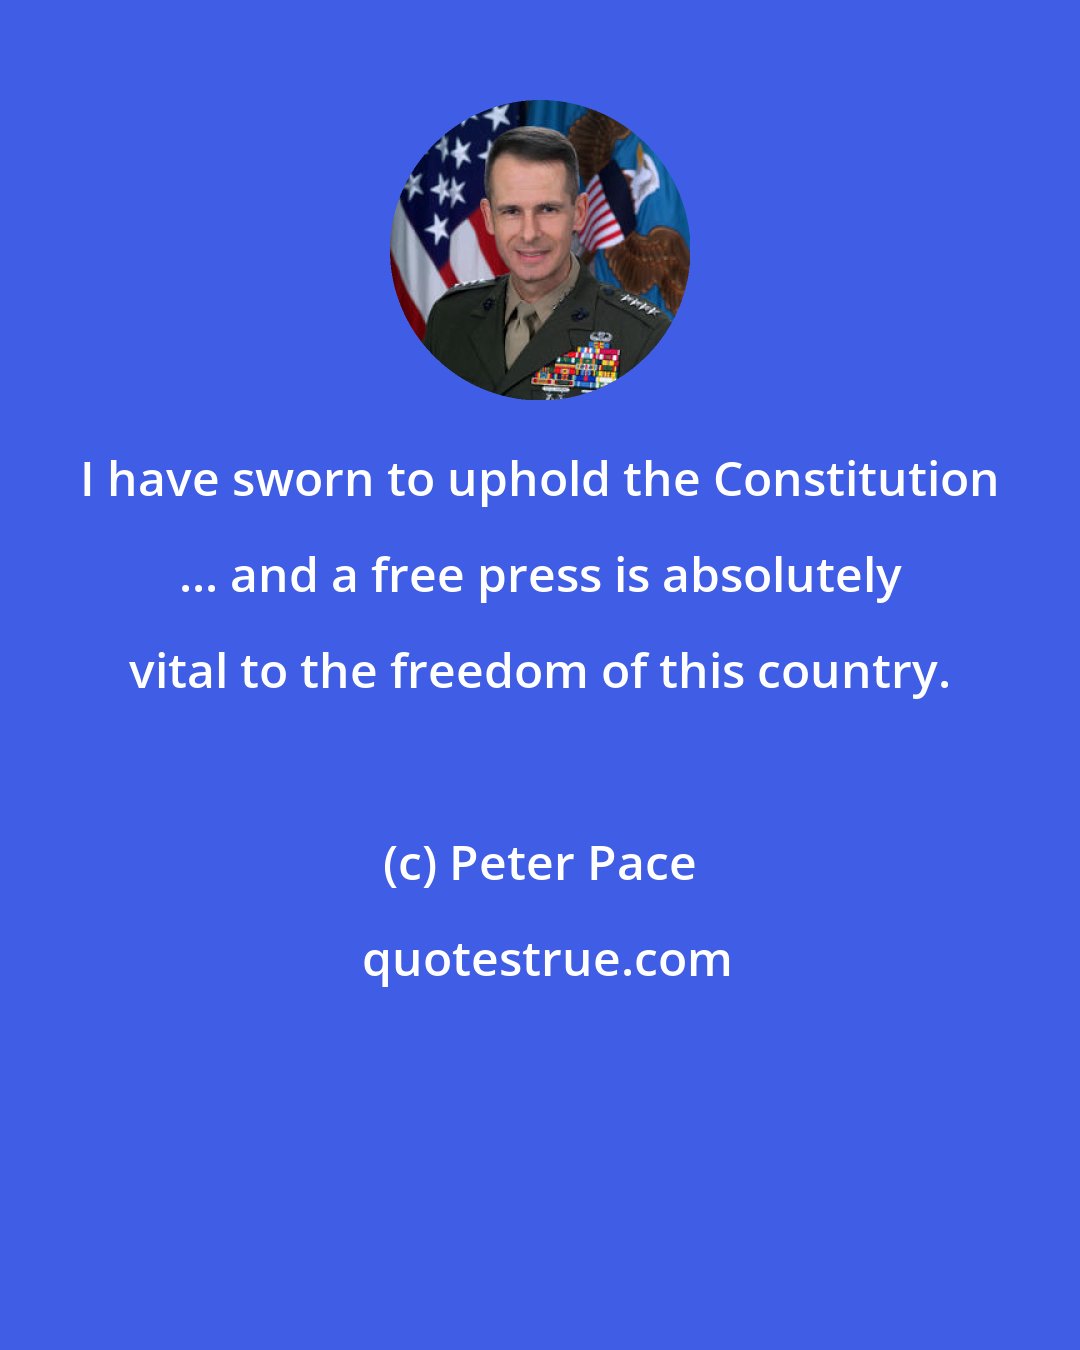 Peter Pace: I have sworn to uphold the Constitution ... and a free press is absolutely vital to the freedom of this country.